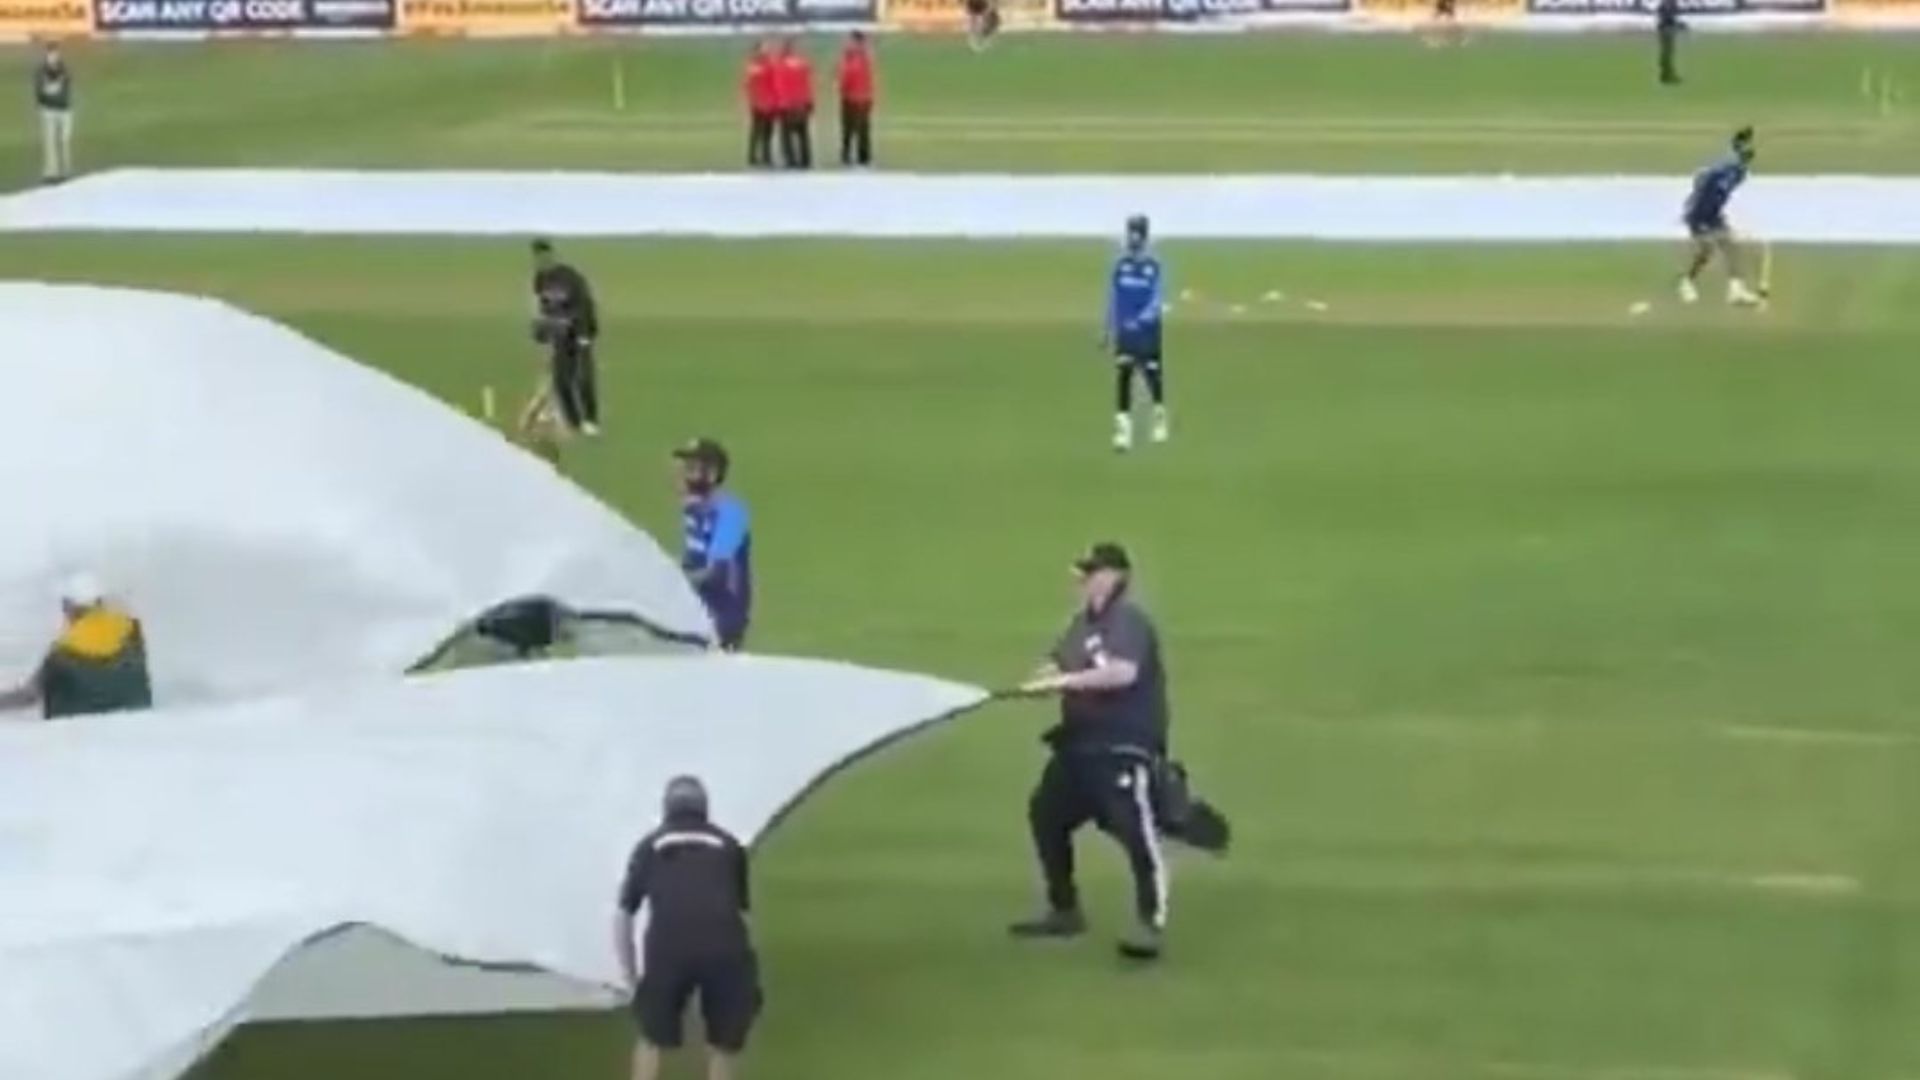 Sanju Samson rushed to help the groundsmen when they couldn